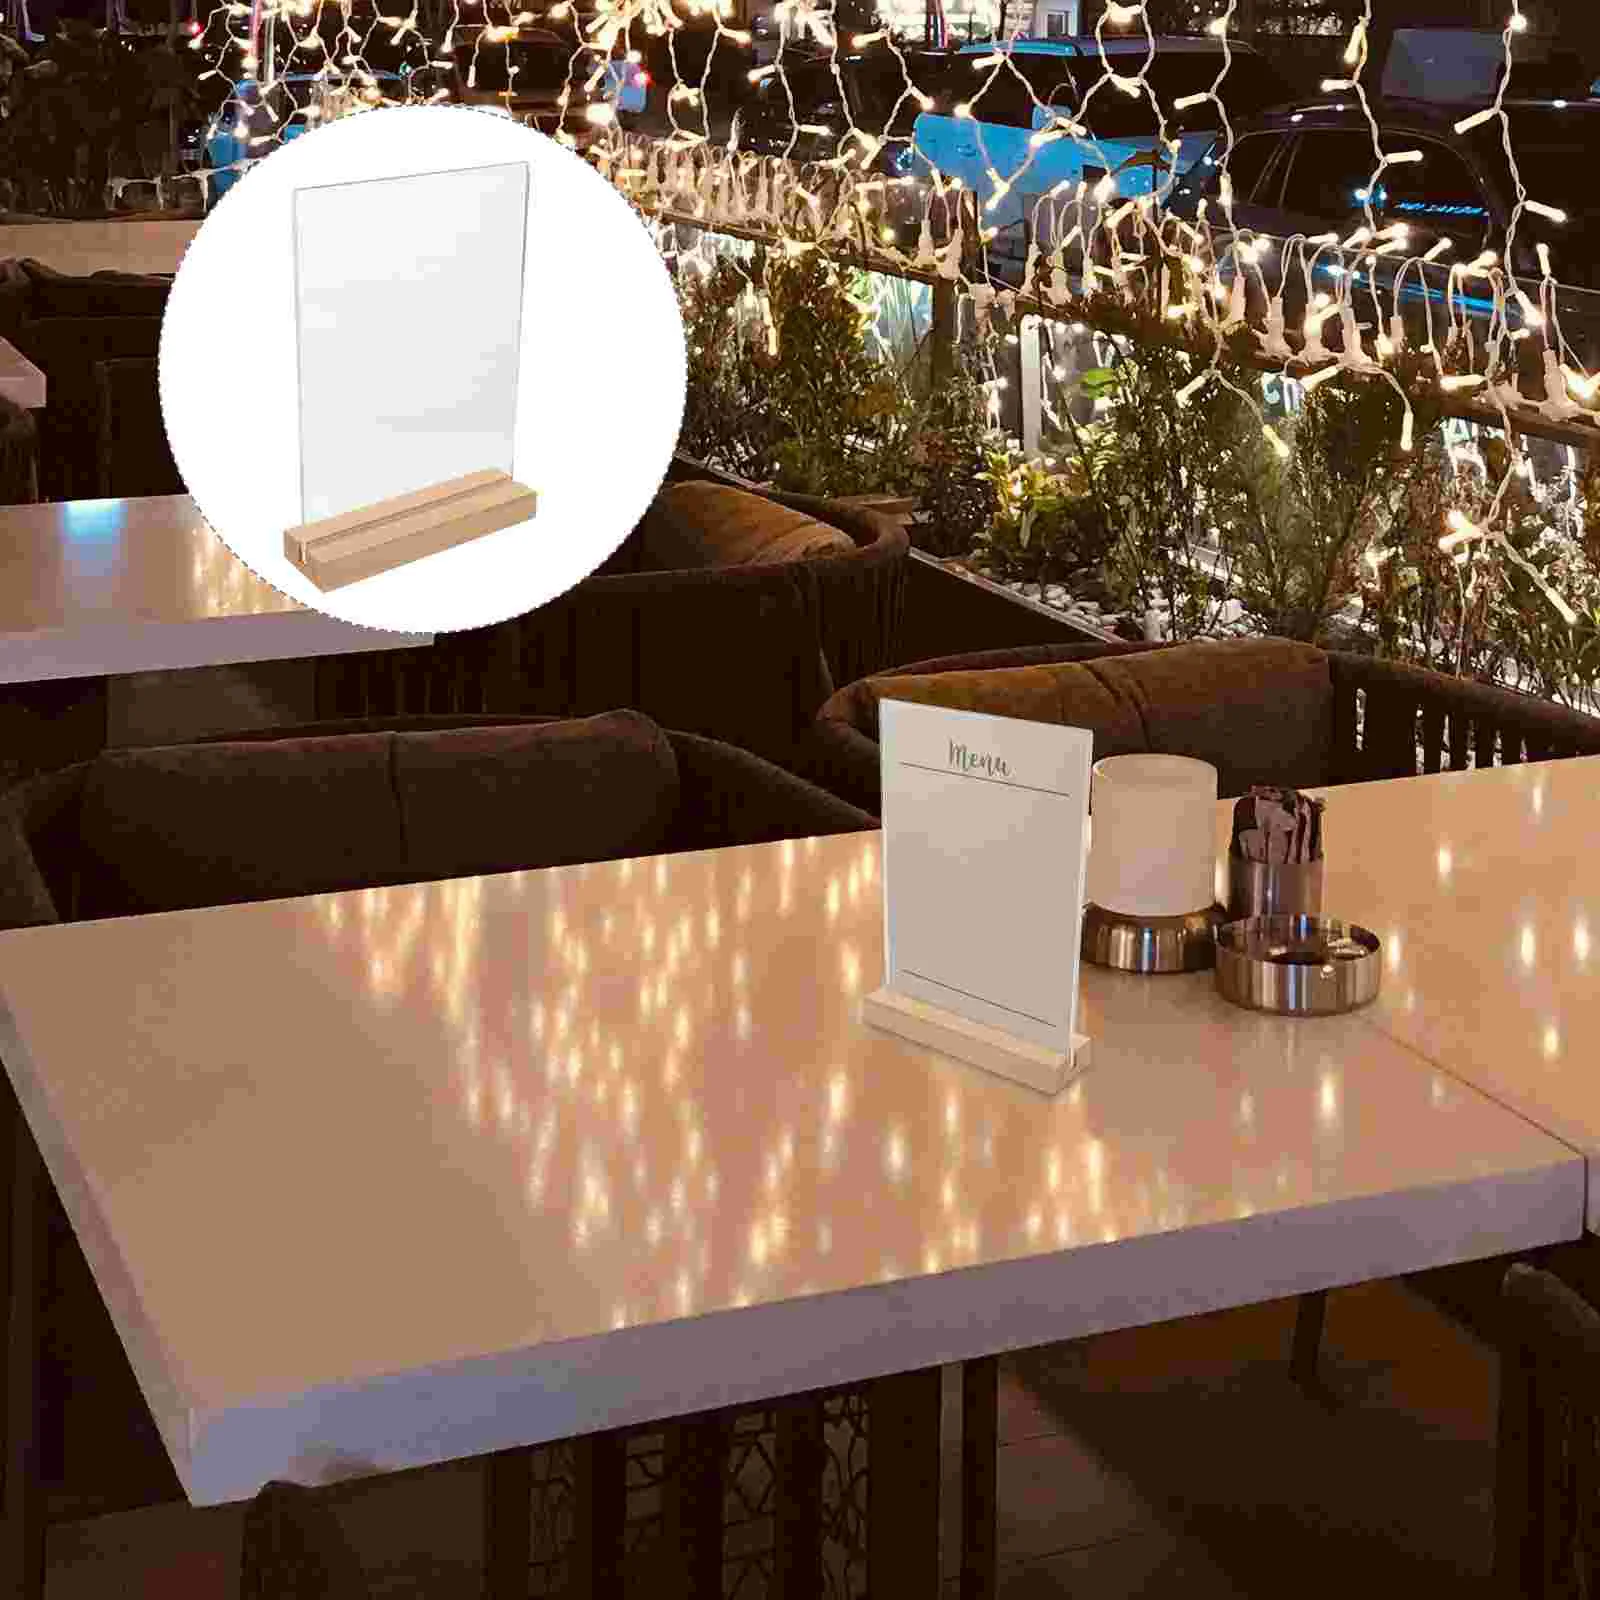 Clear Menu Display Stand Desktop Poster Holder Acrylic Sign Holder for Restaurants with Wood Base a4 flip acrylic sign holder 8 5x11 wood table menu display stand holder ad frame for restaurants hotels stores